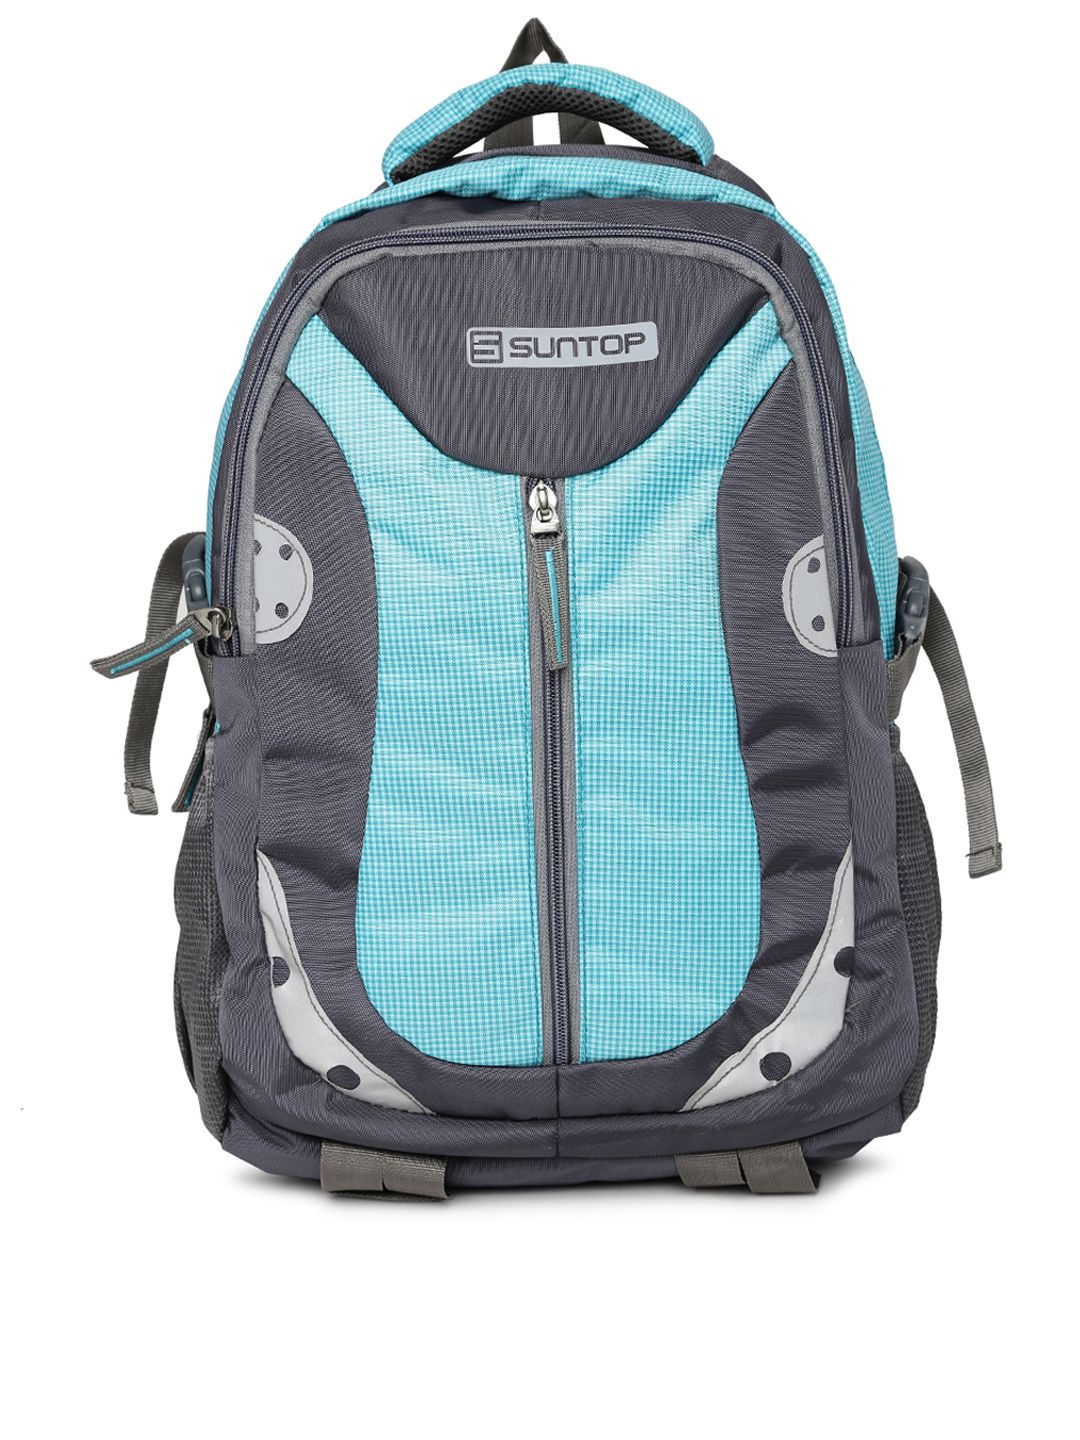 Suntop Unisex Grey & Blue Neo 9 Checked Laptop Backpack Price in India